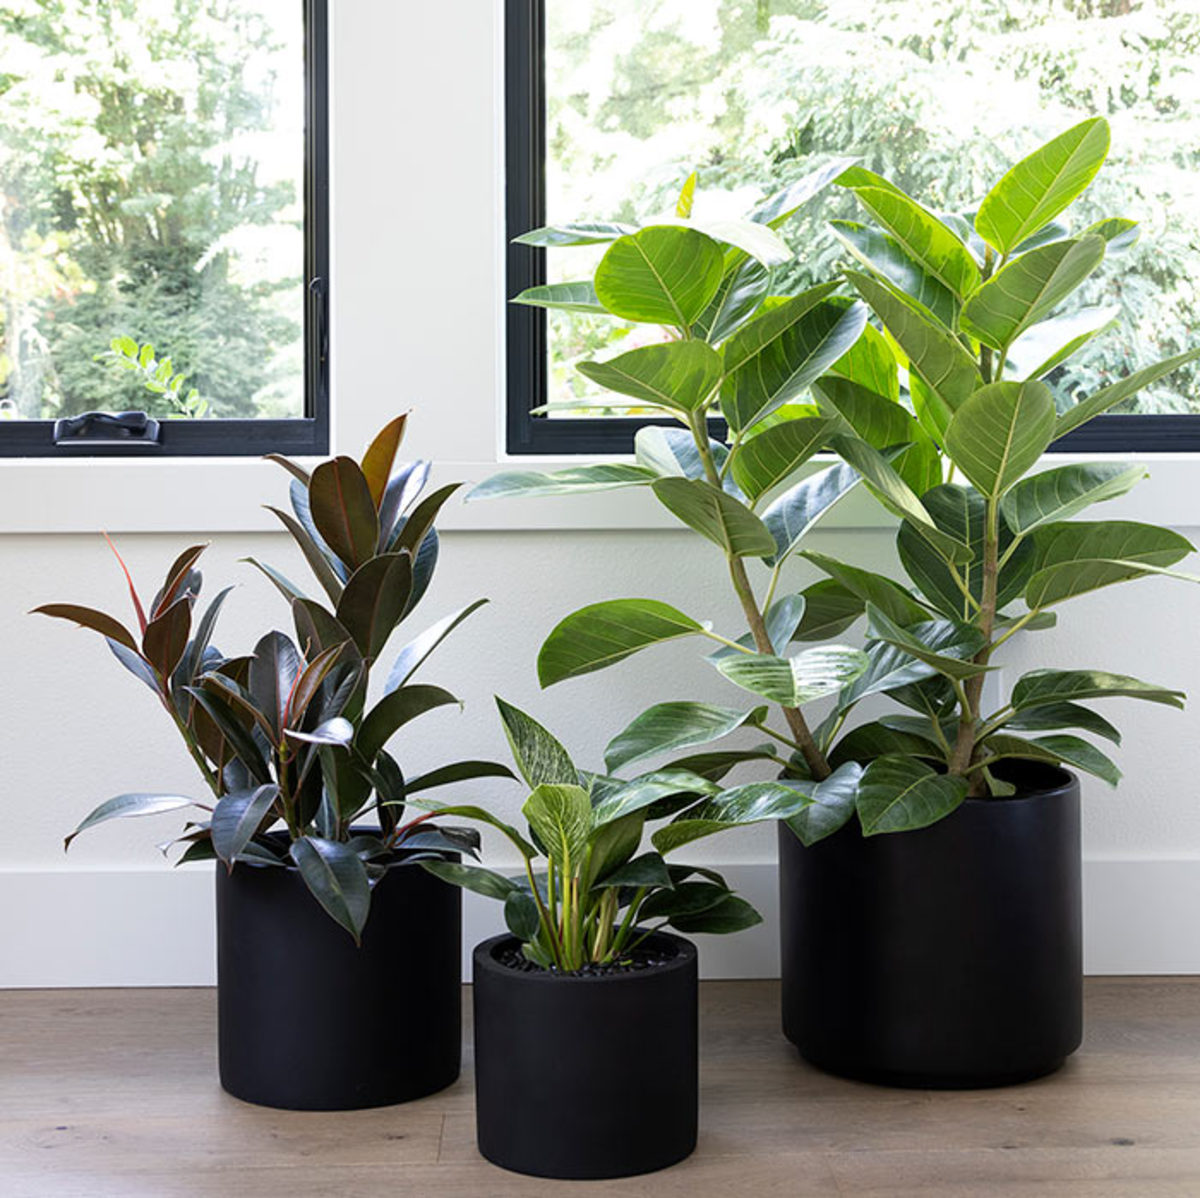 Left to right: 'Abidjan' rubber plant, 'Birkin' philodendron and 'Variegata' council tree